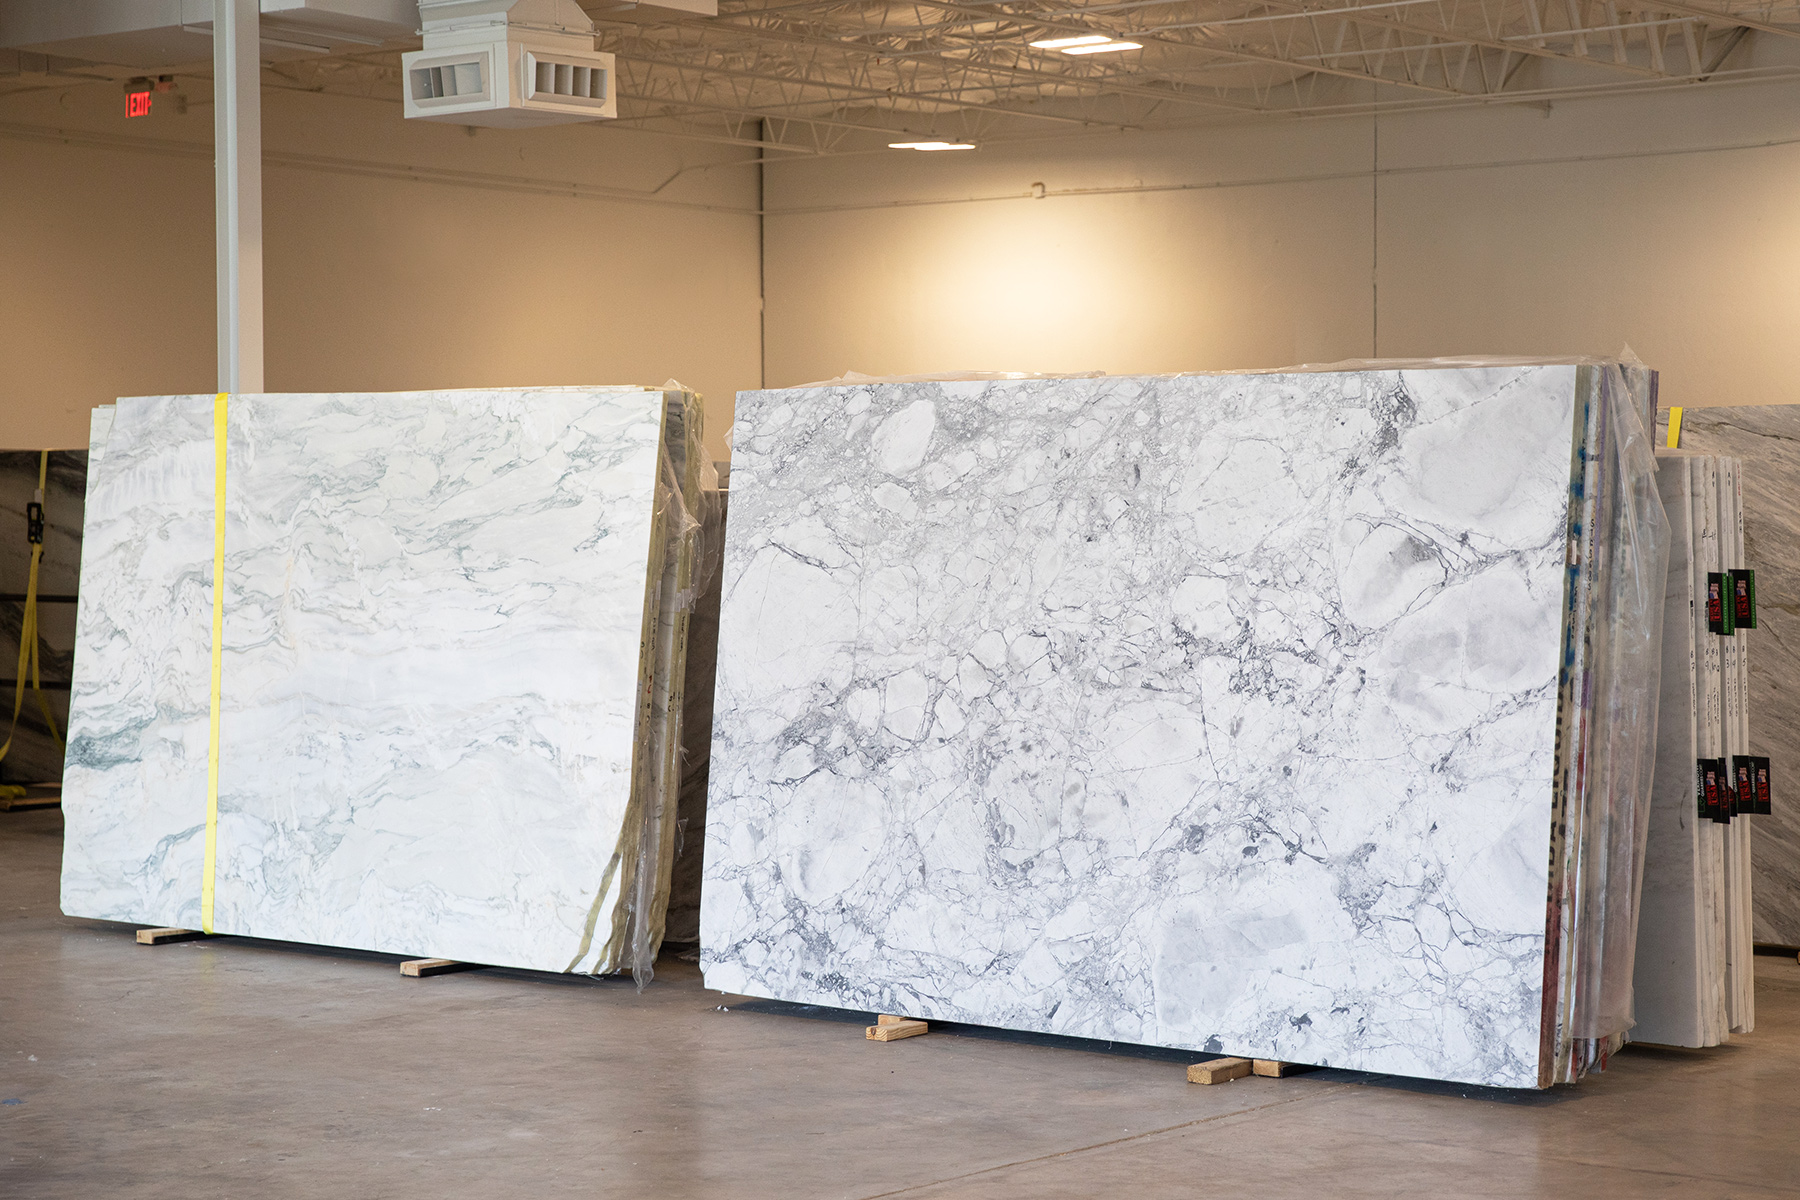 Retail Roundup: Find Your Next Countertop at Ann Sacks’ New Slab ...